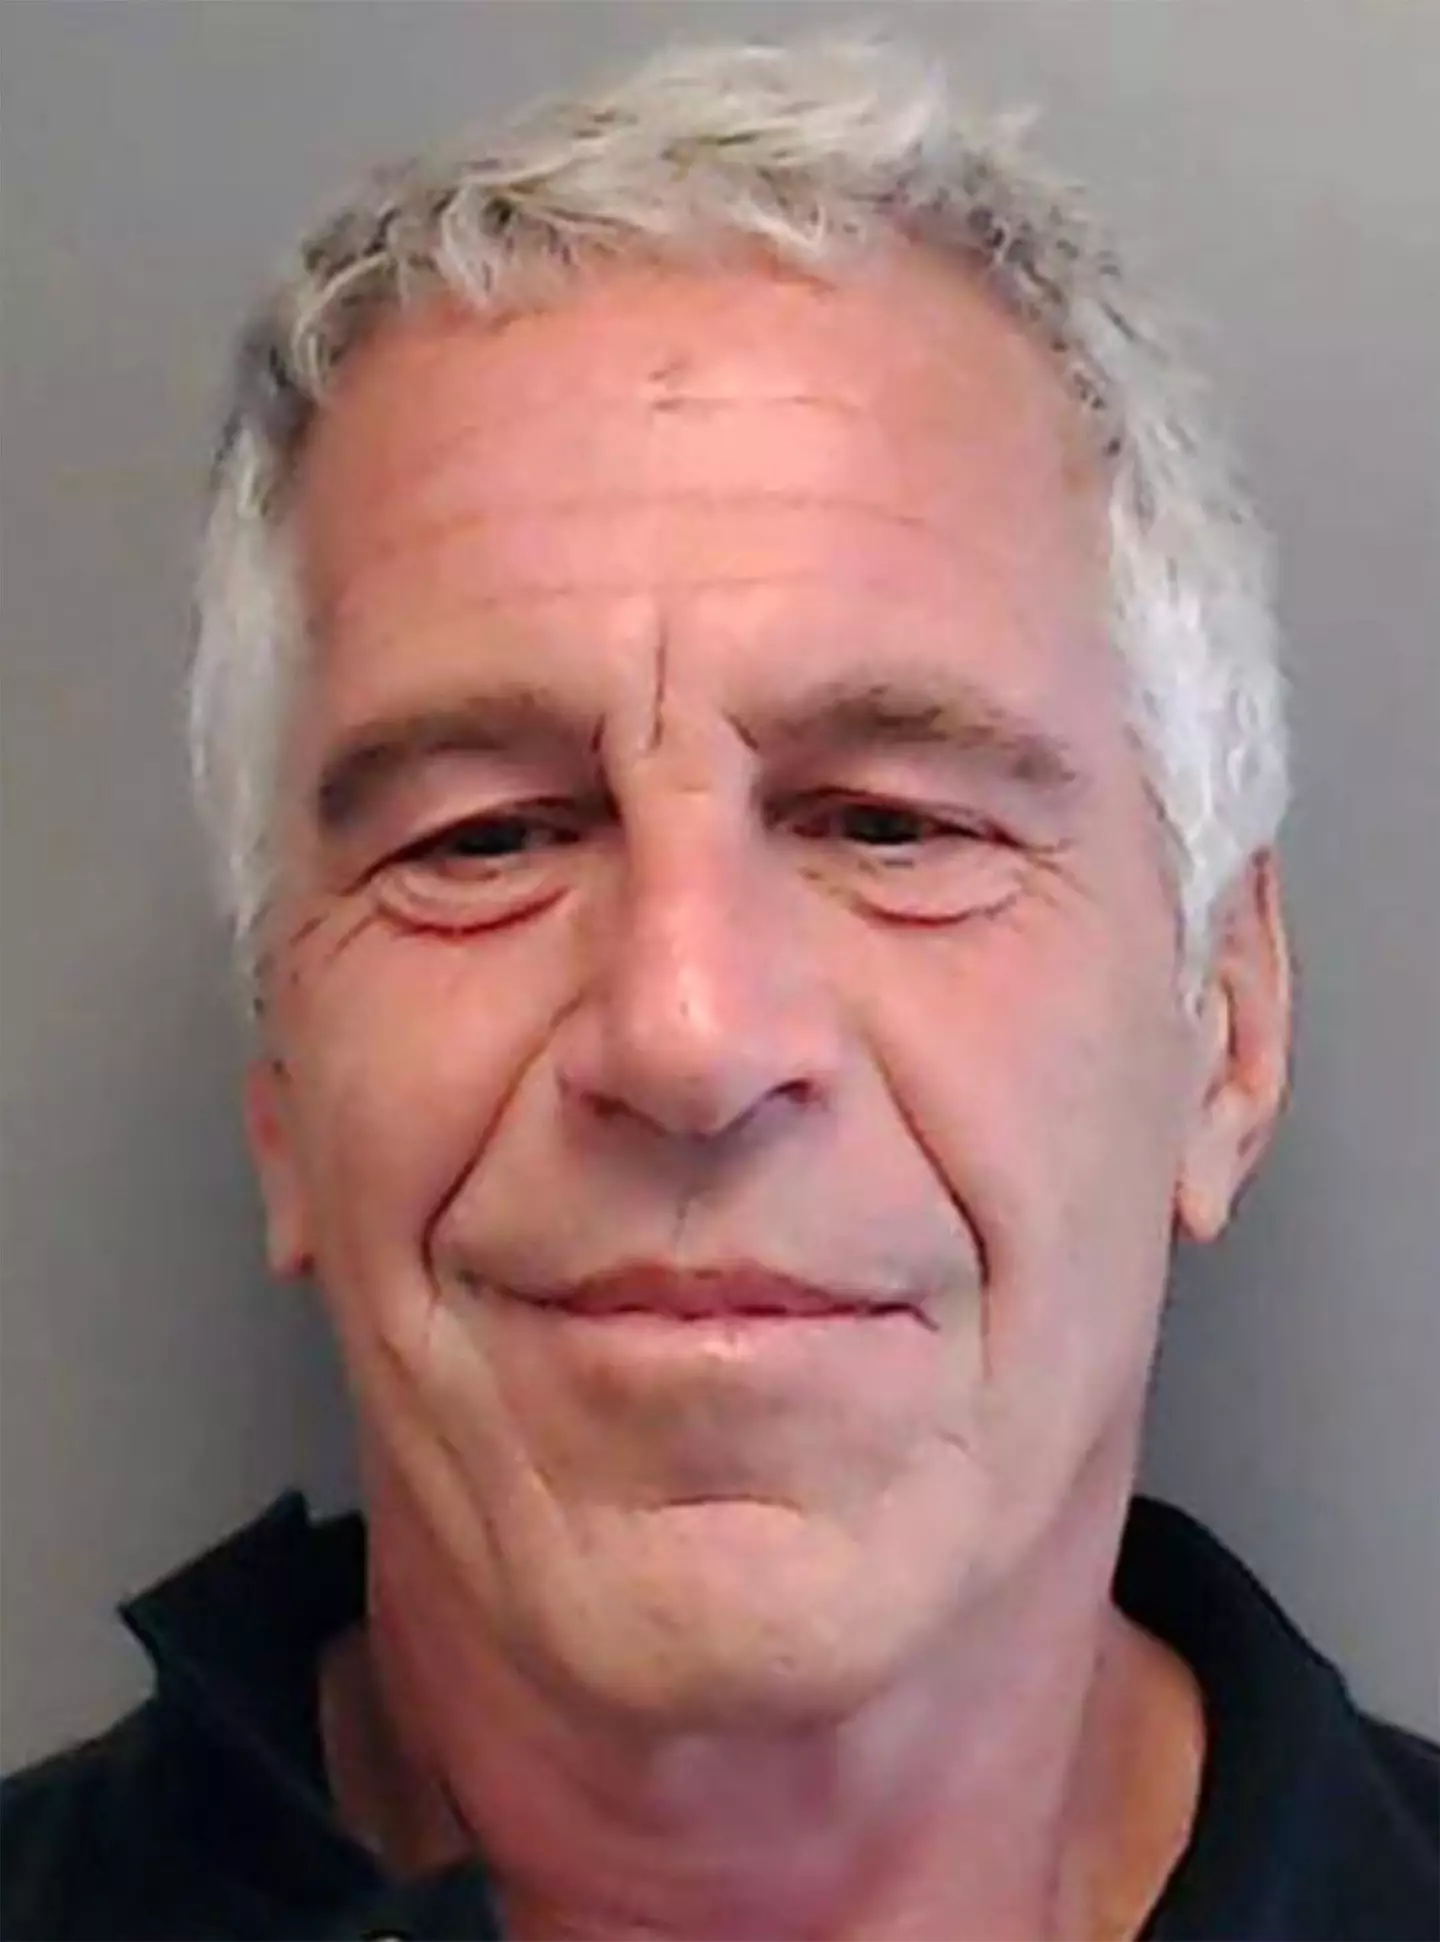 Epstein was accused of trafficking and grooming underage girls.